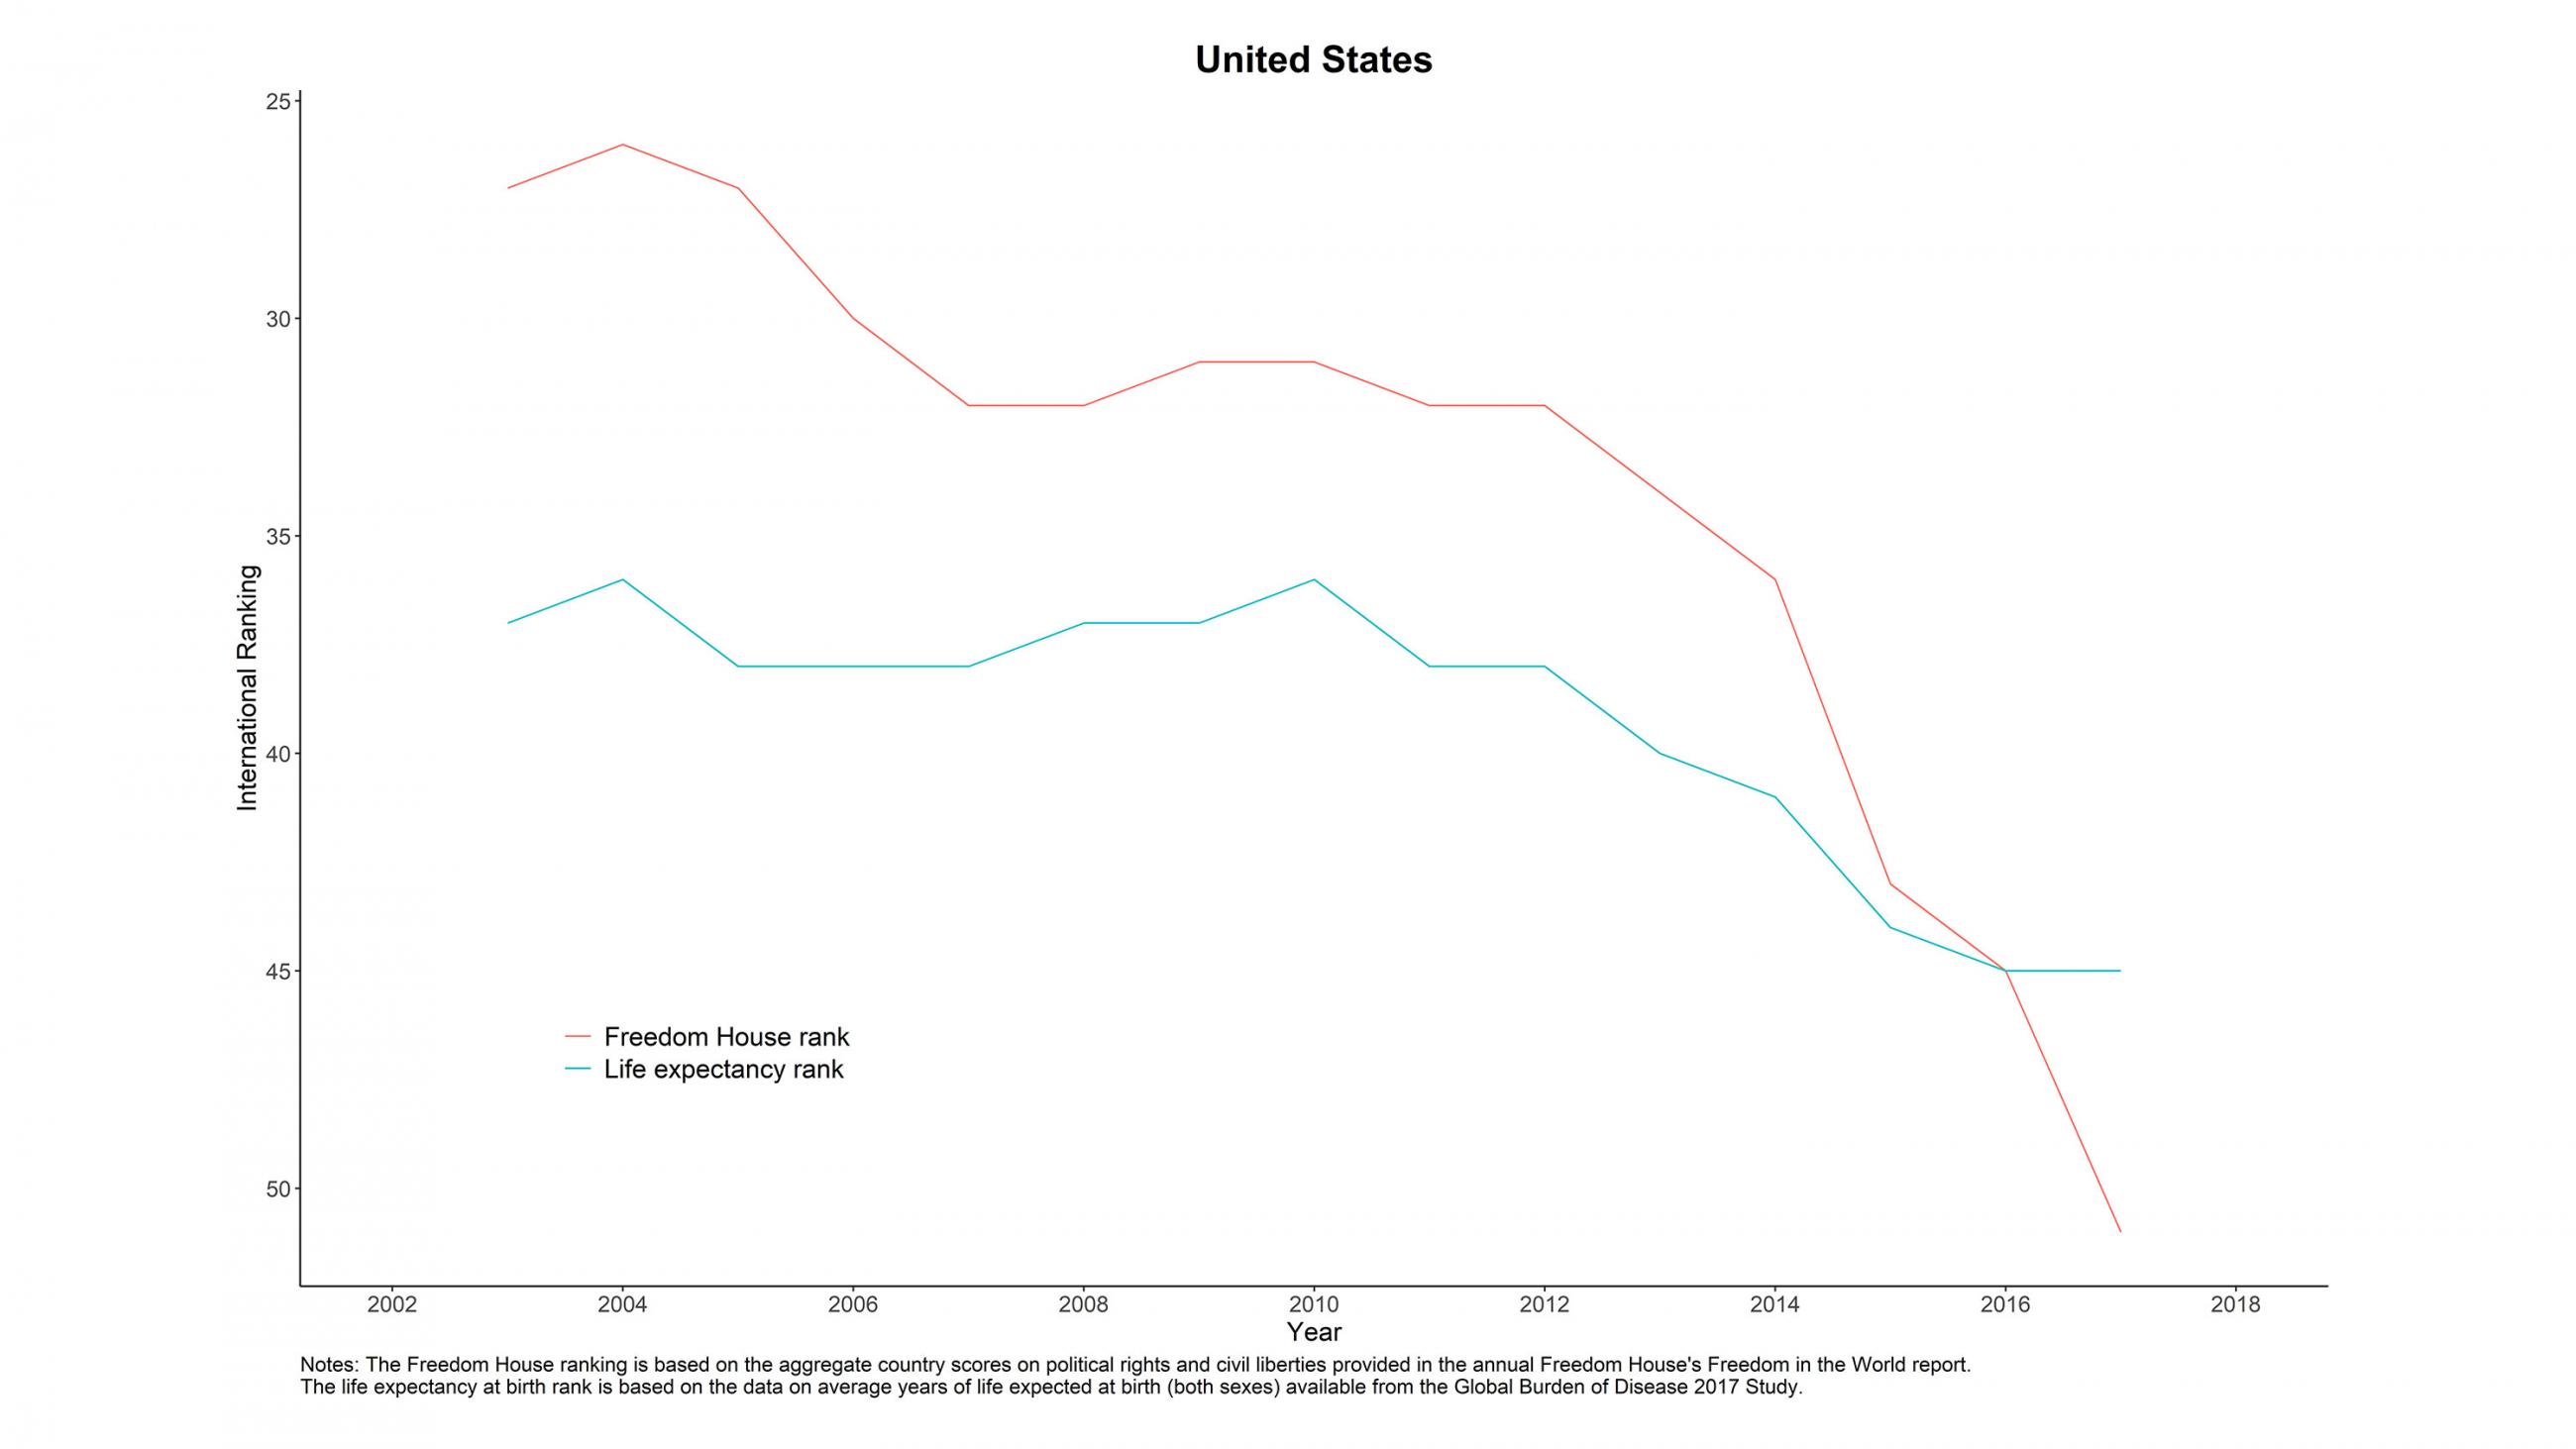 U.S rankings in health and democracy are declining. Image shows a time plot from 2002 to 2018. On the graph two lines are plotted: U.S. life expectancy and Freedom House democracy rank. Both lines can be seen falling steadily from 2010 on. 